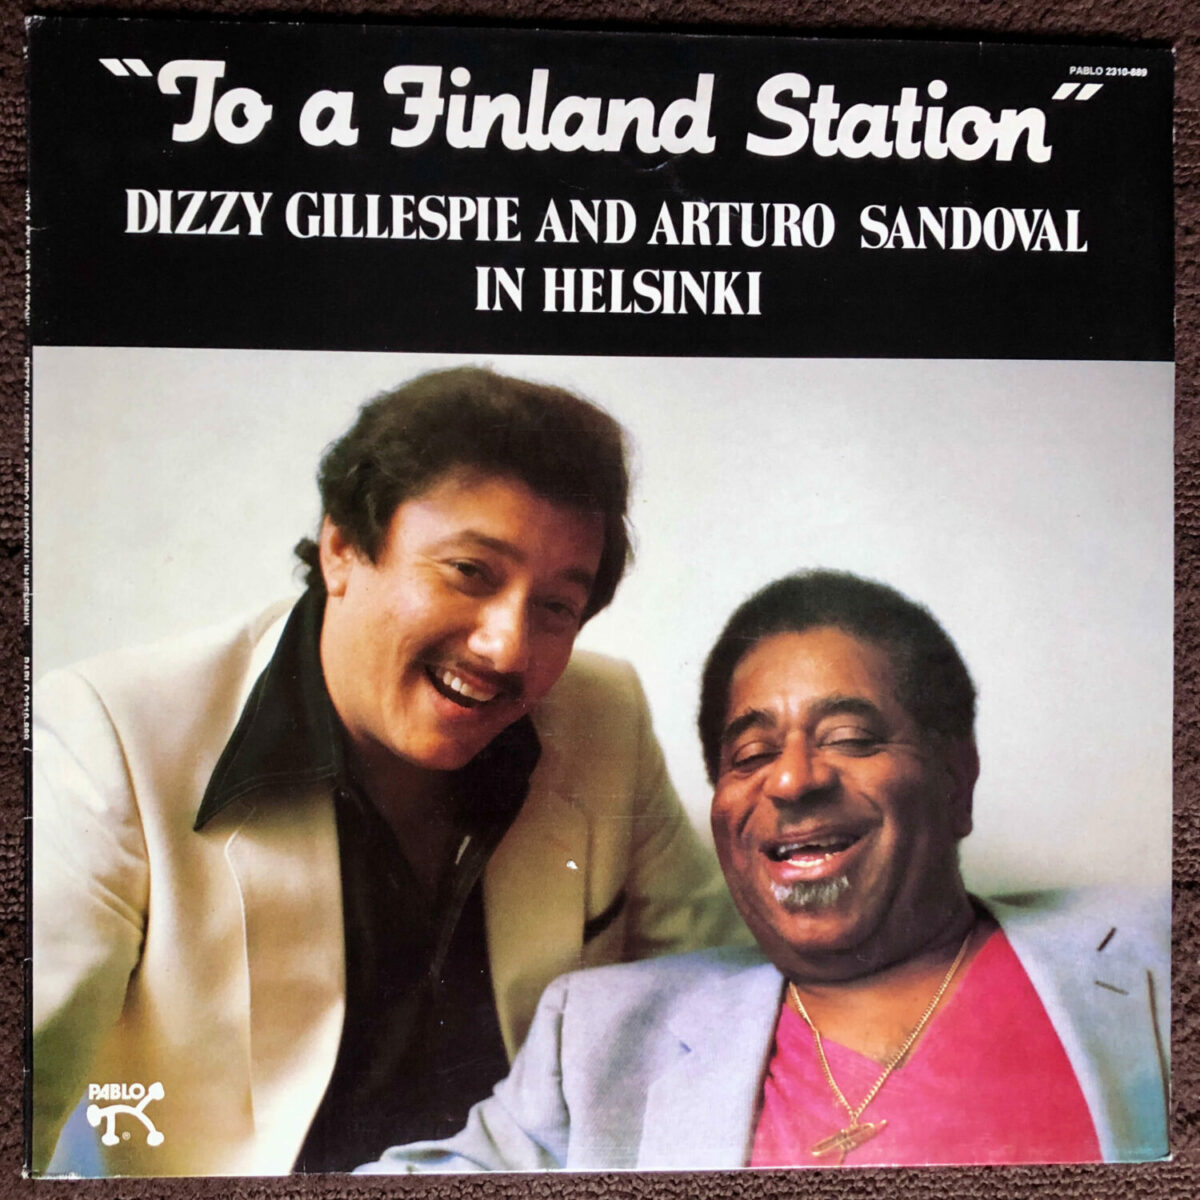 "To a Finland station" by Dizzy Gillespie and Arturo Sandoval